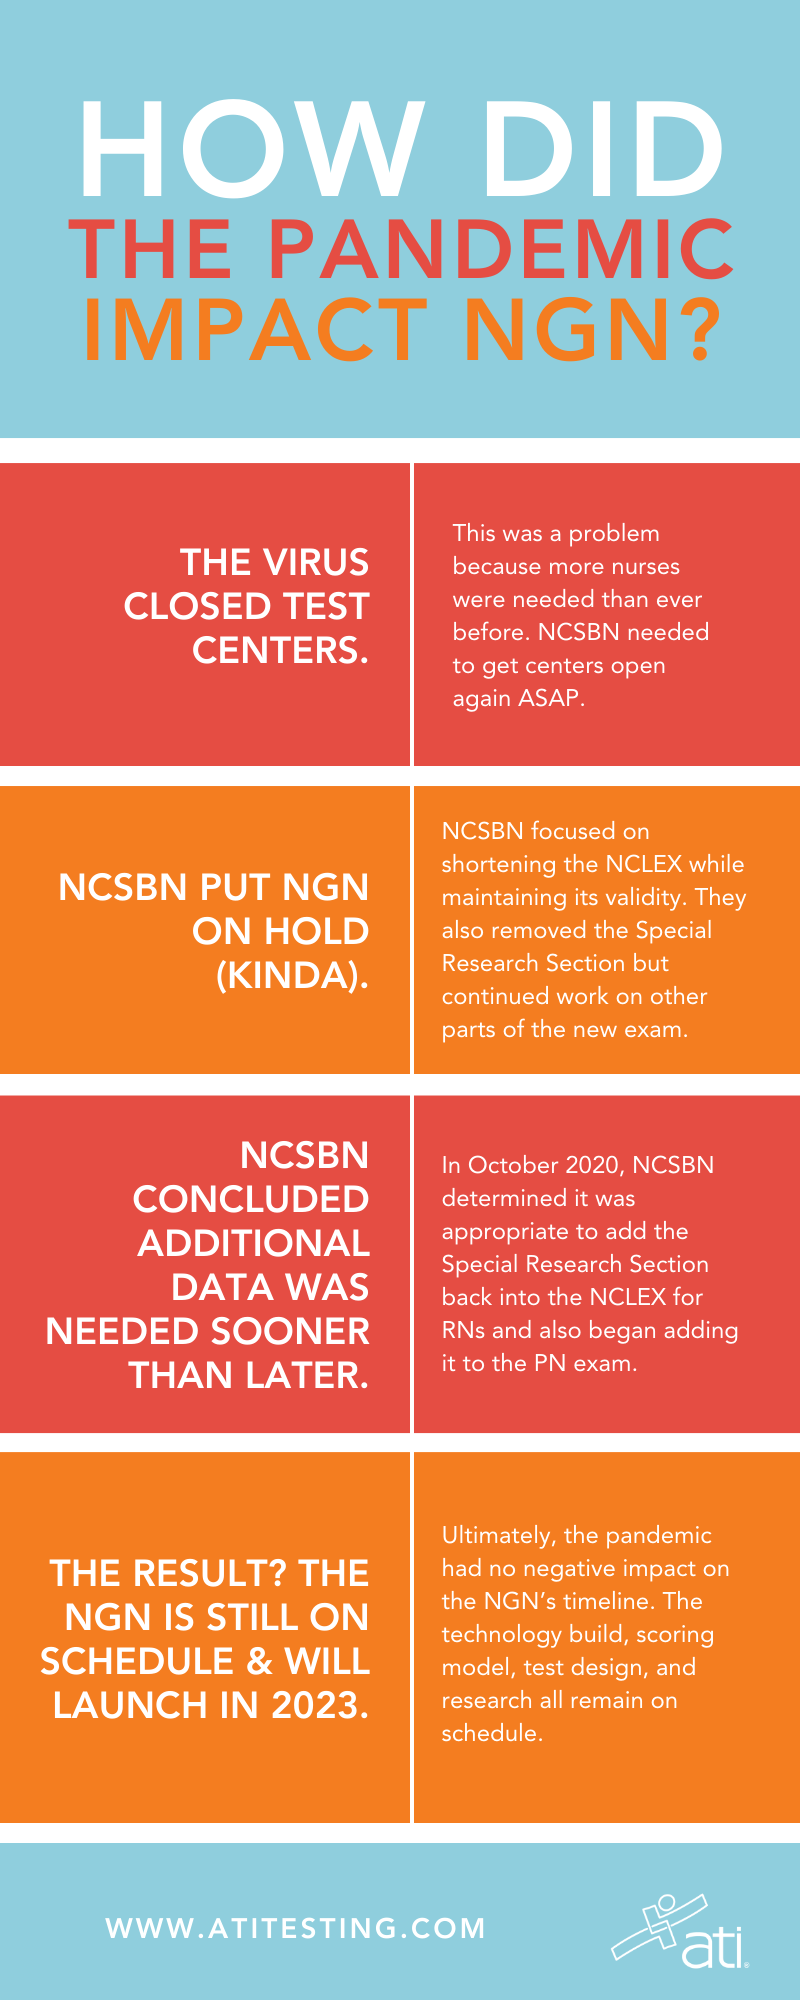 Things to Know About the NEXT GENERATION NCLEX EXAM